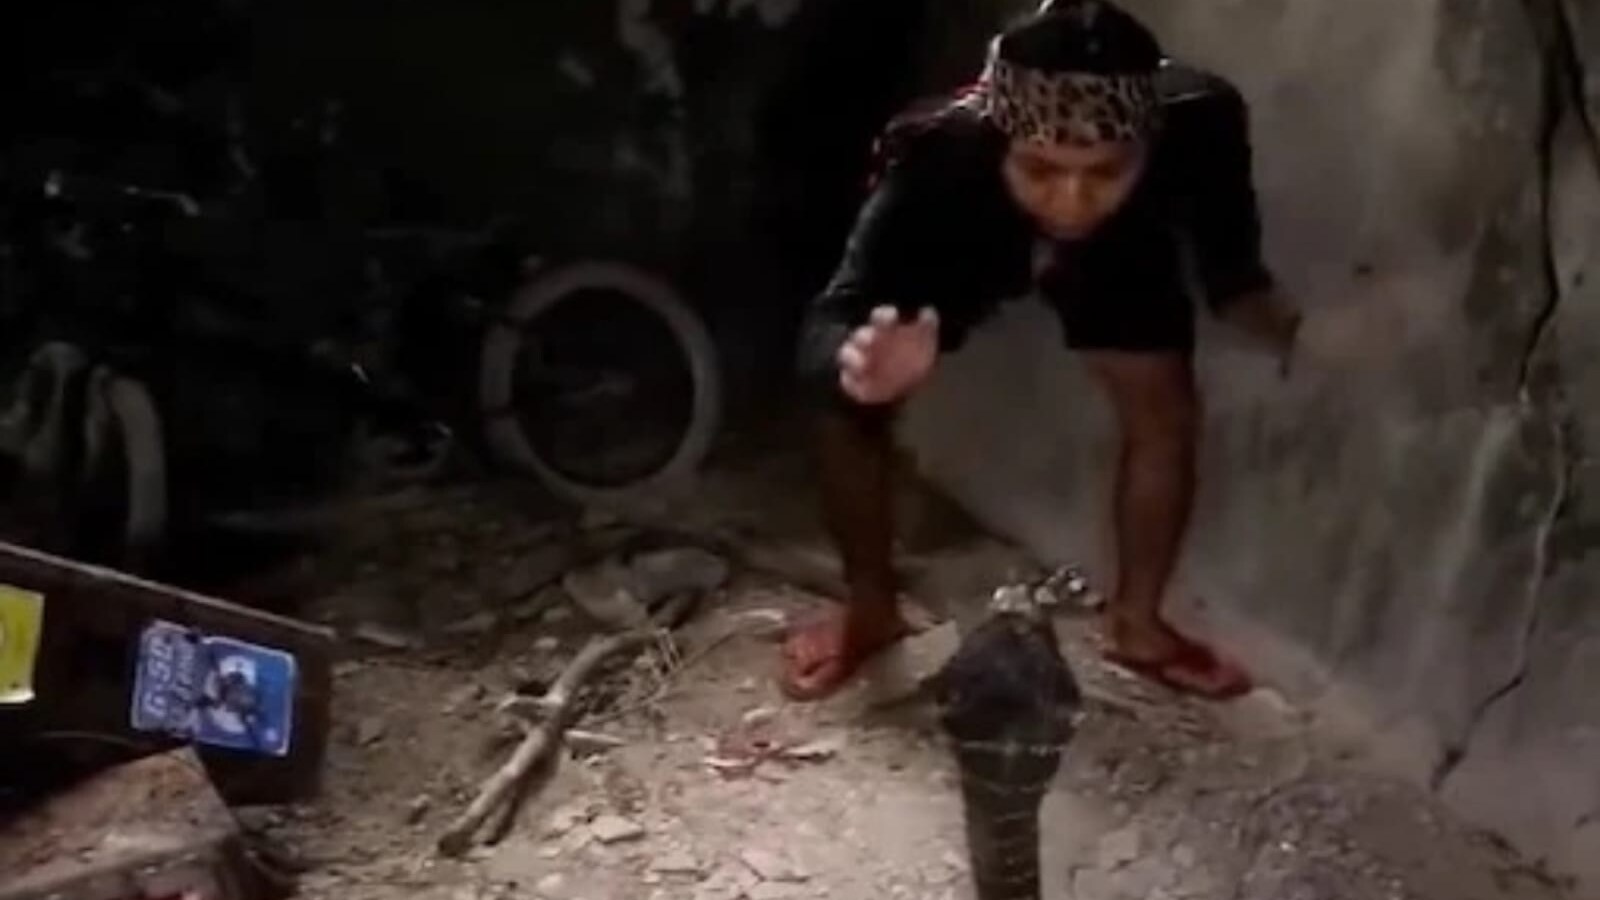 Woman Catches a Huge Snake With Bare Hands, Video Goes Viral